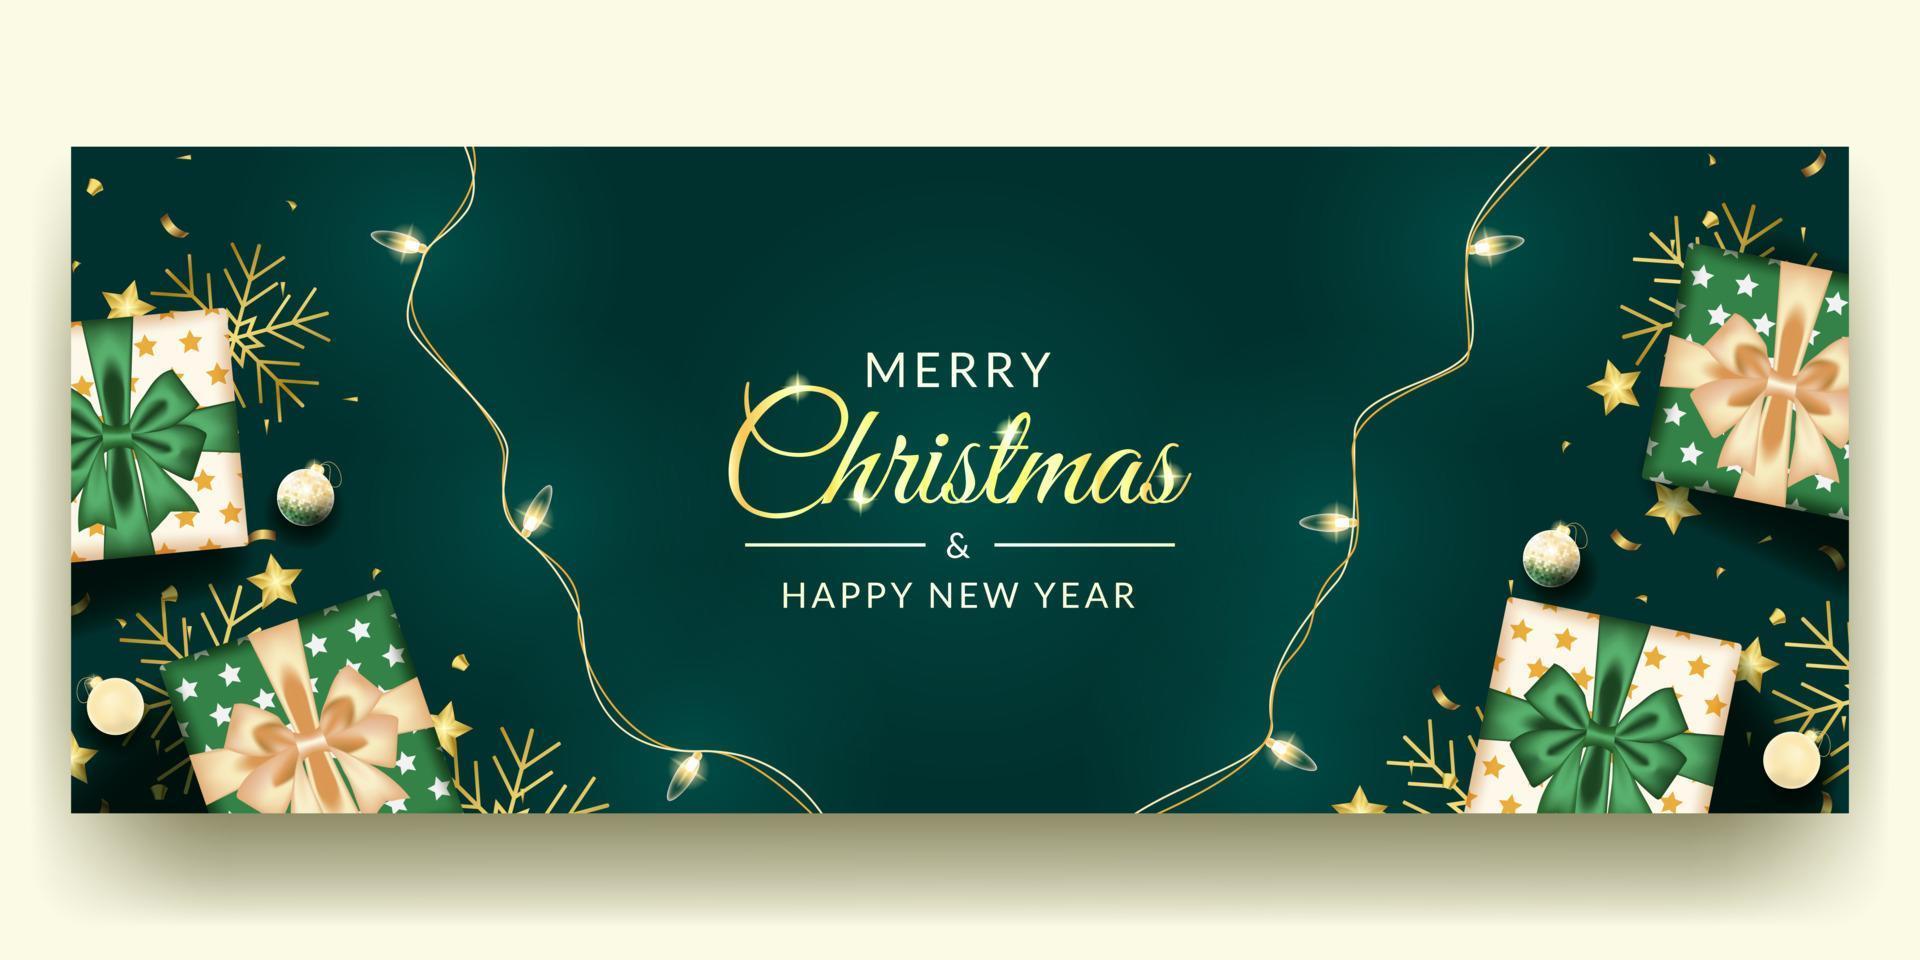 merry christmas and happy new banner design with realistic green decoration vector